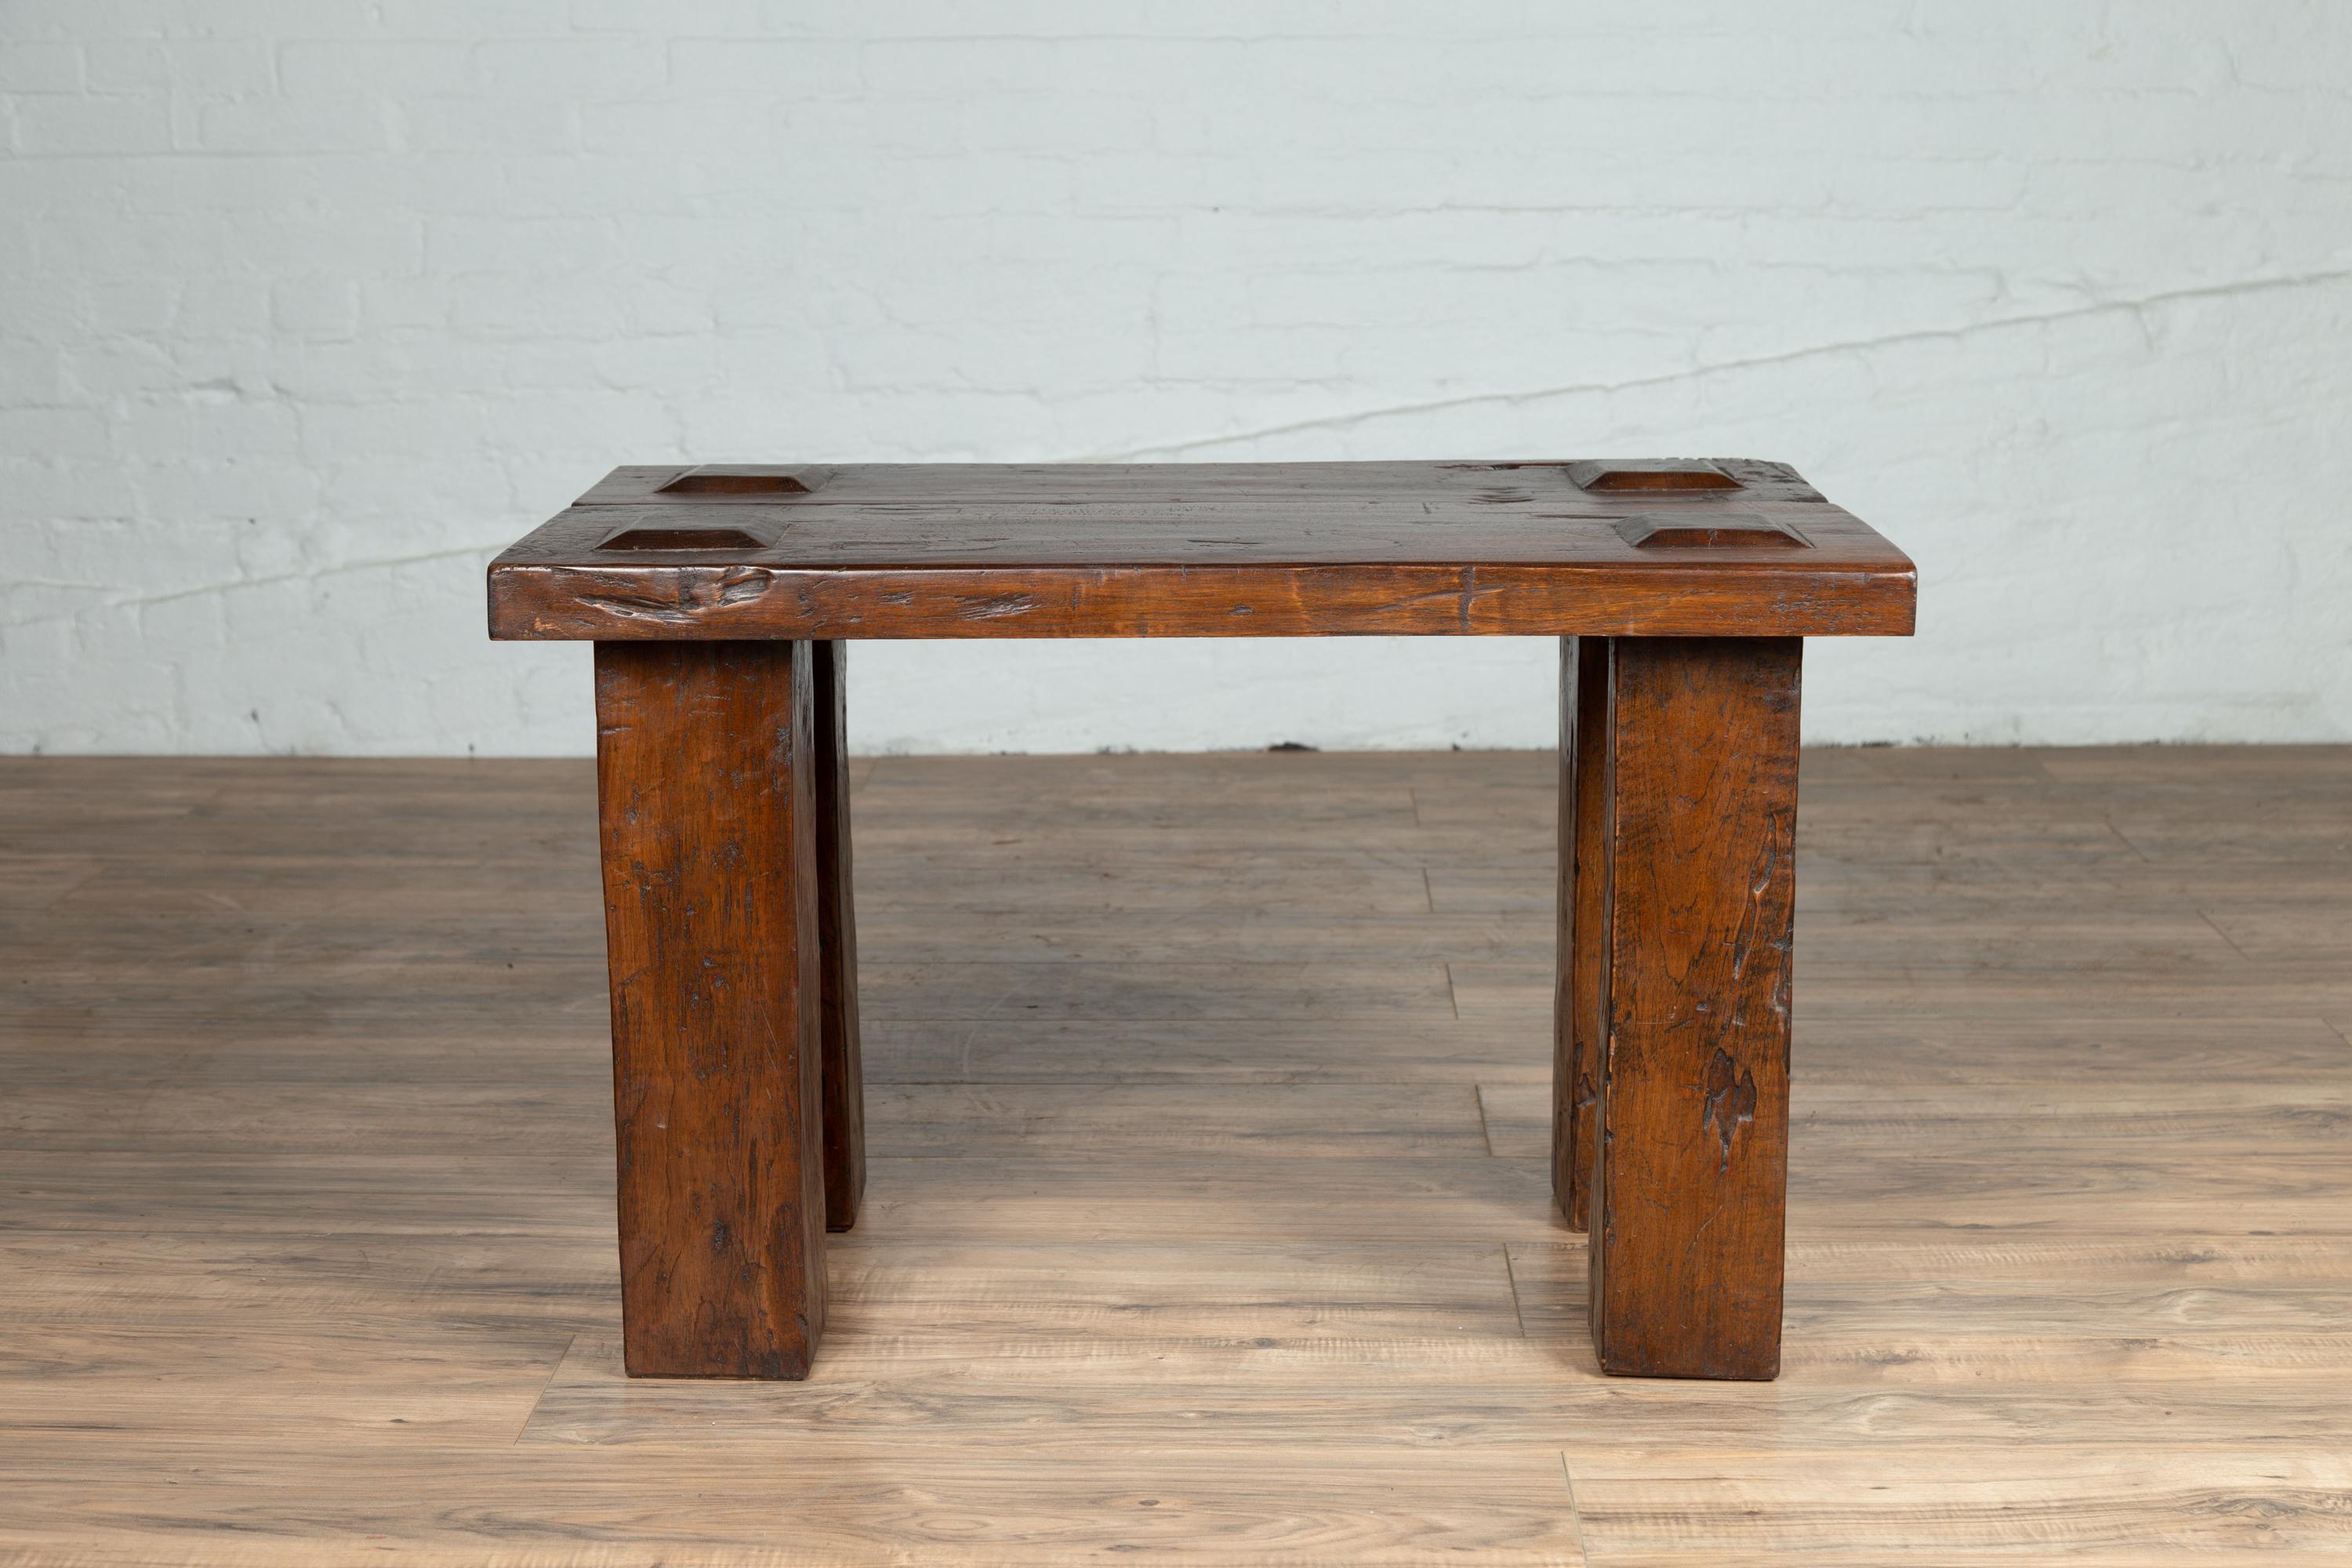 Rustic Vintage Javanese Midcentury Wooden Bench with Raised Motifs and Straight Legs